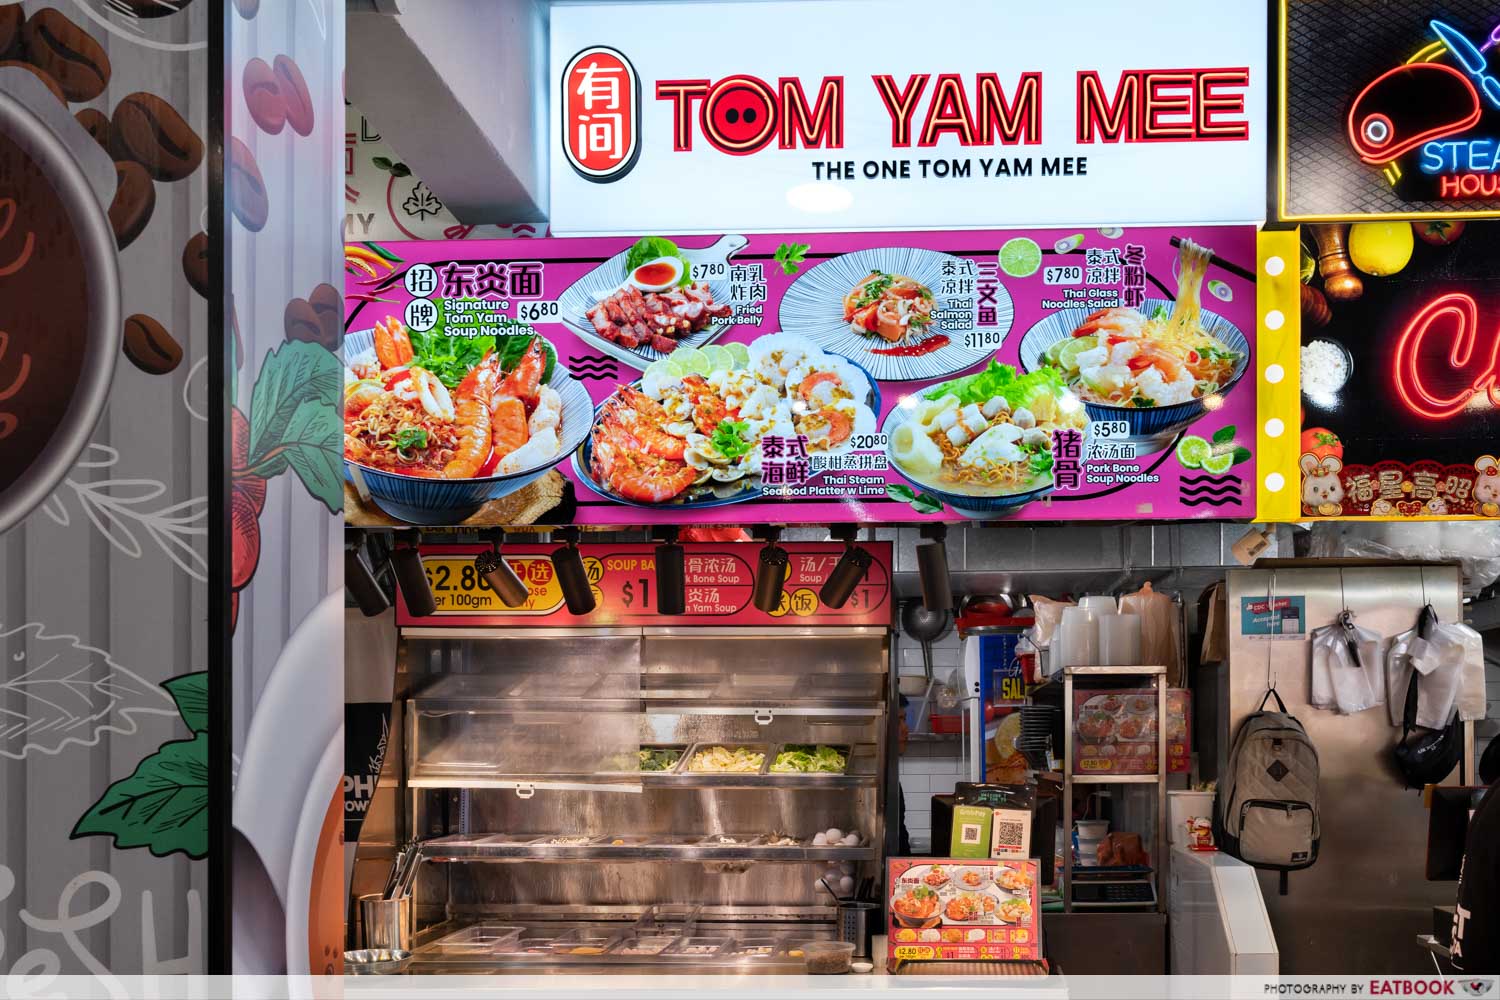 The_One_Tom_Yam_mee_Stallfront